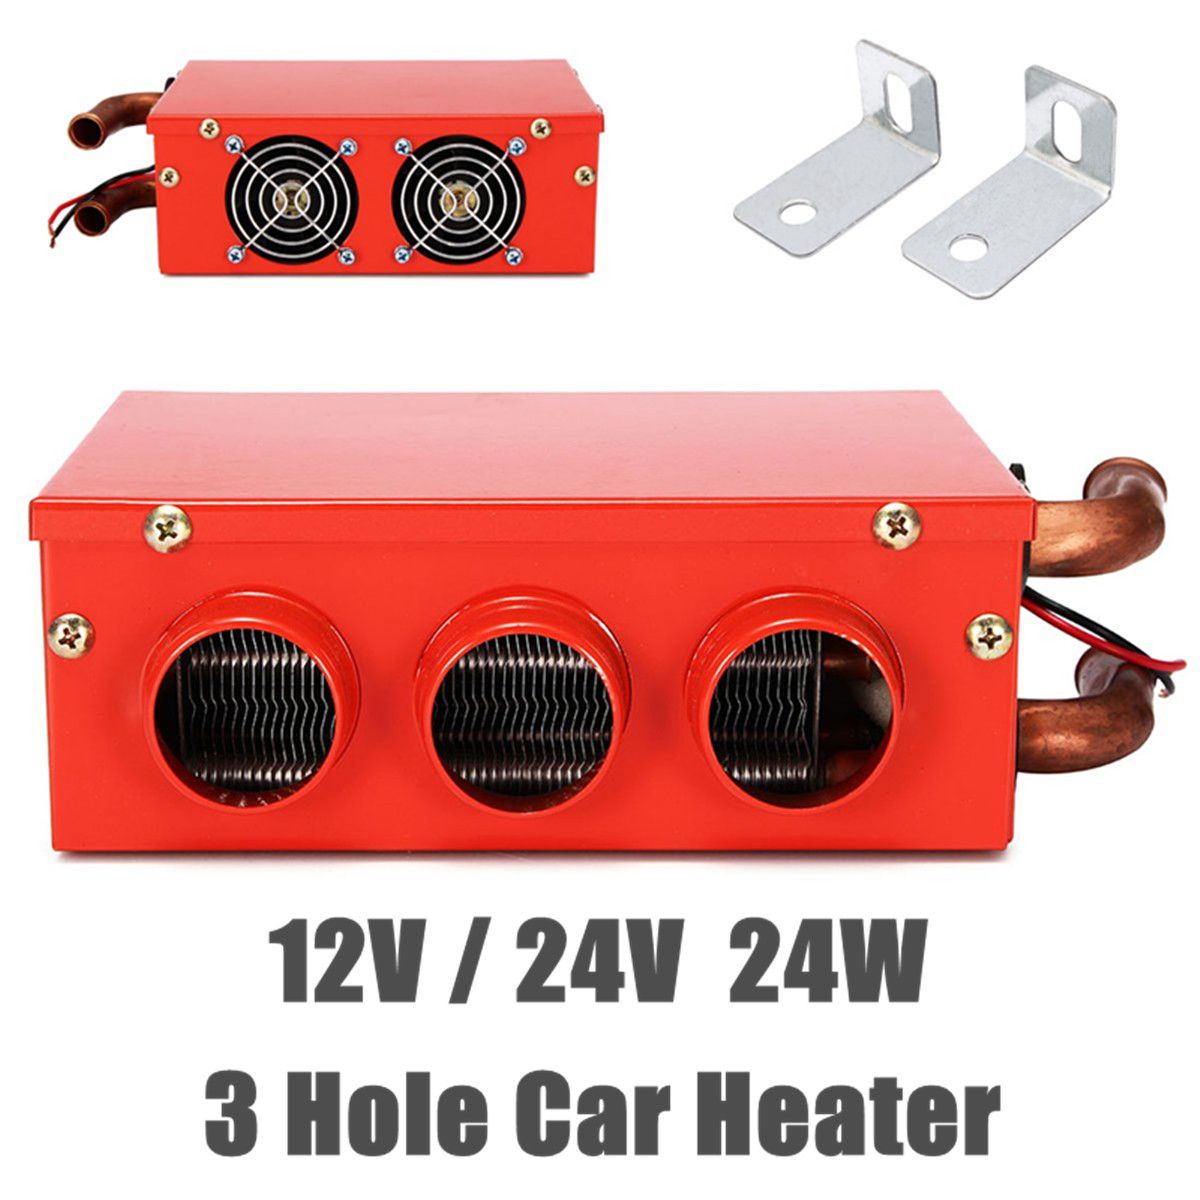 1224V-24W-Universal-Portable-Car-Van-Heating-Compact-Heater-Defroster-Demister-1290156